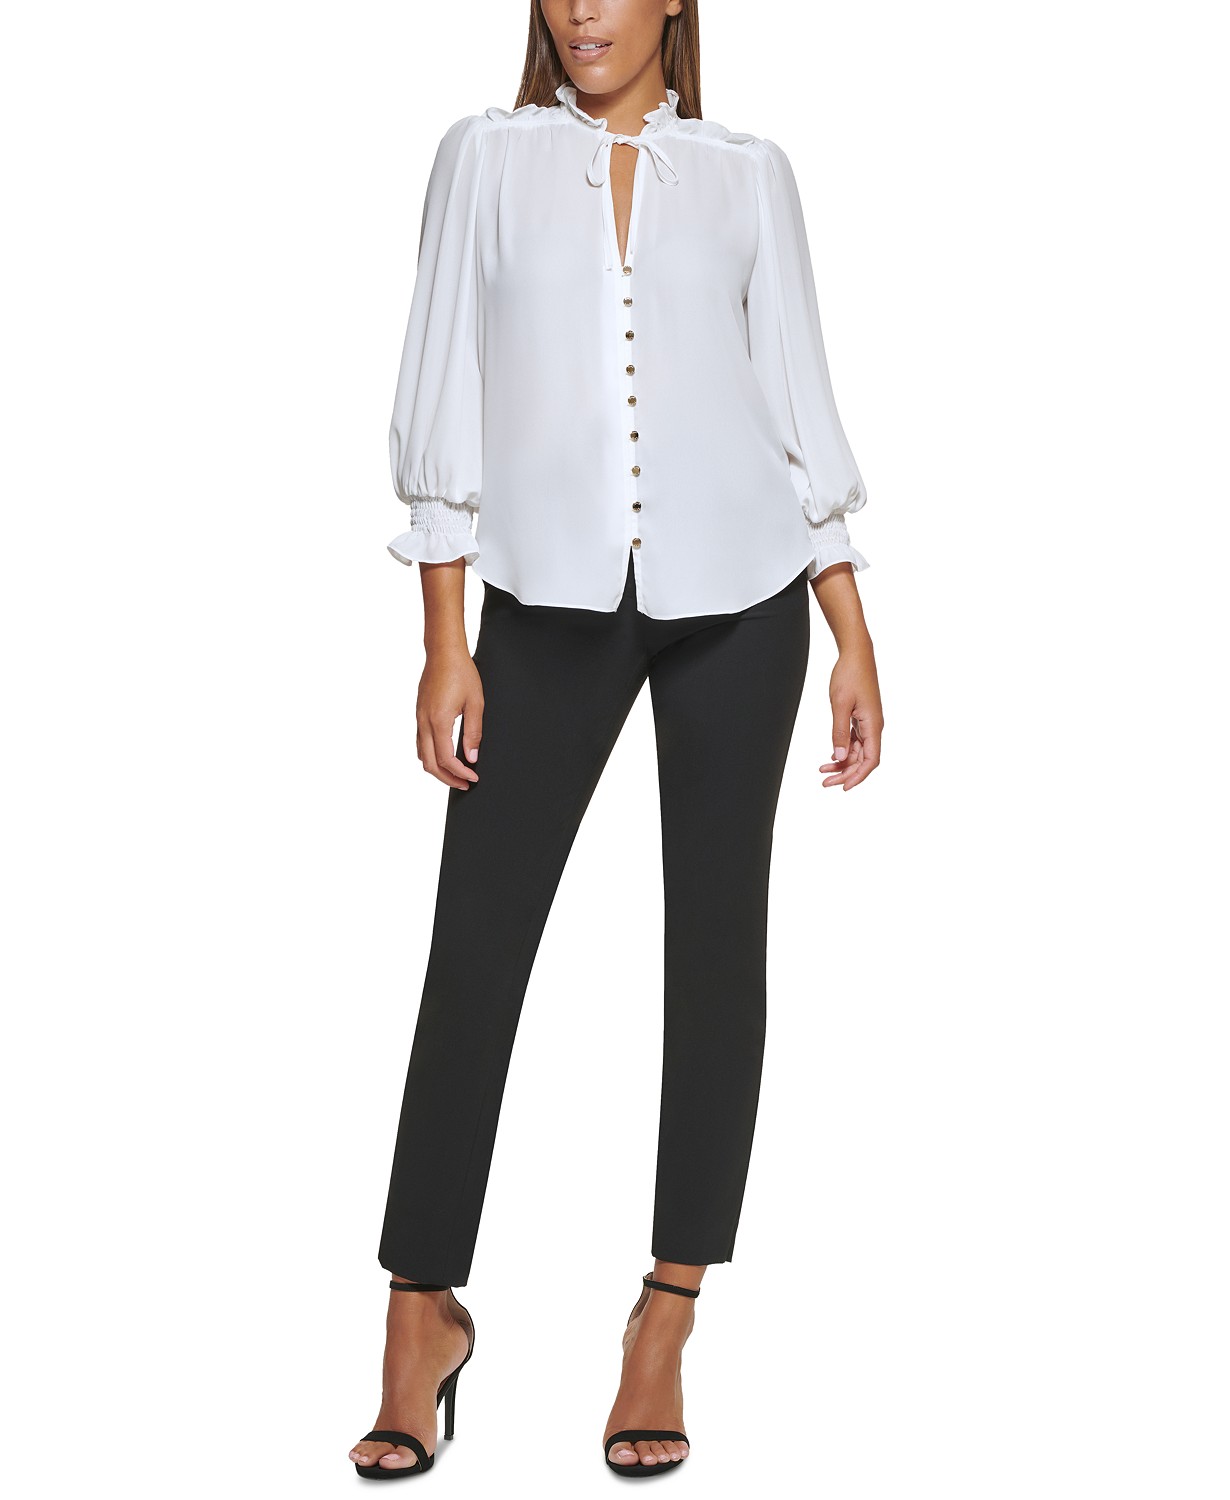 DKNY Petite Tie-Neck Button-Front Ruffled Top